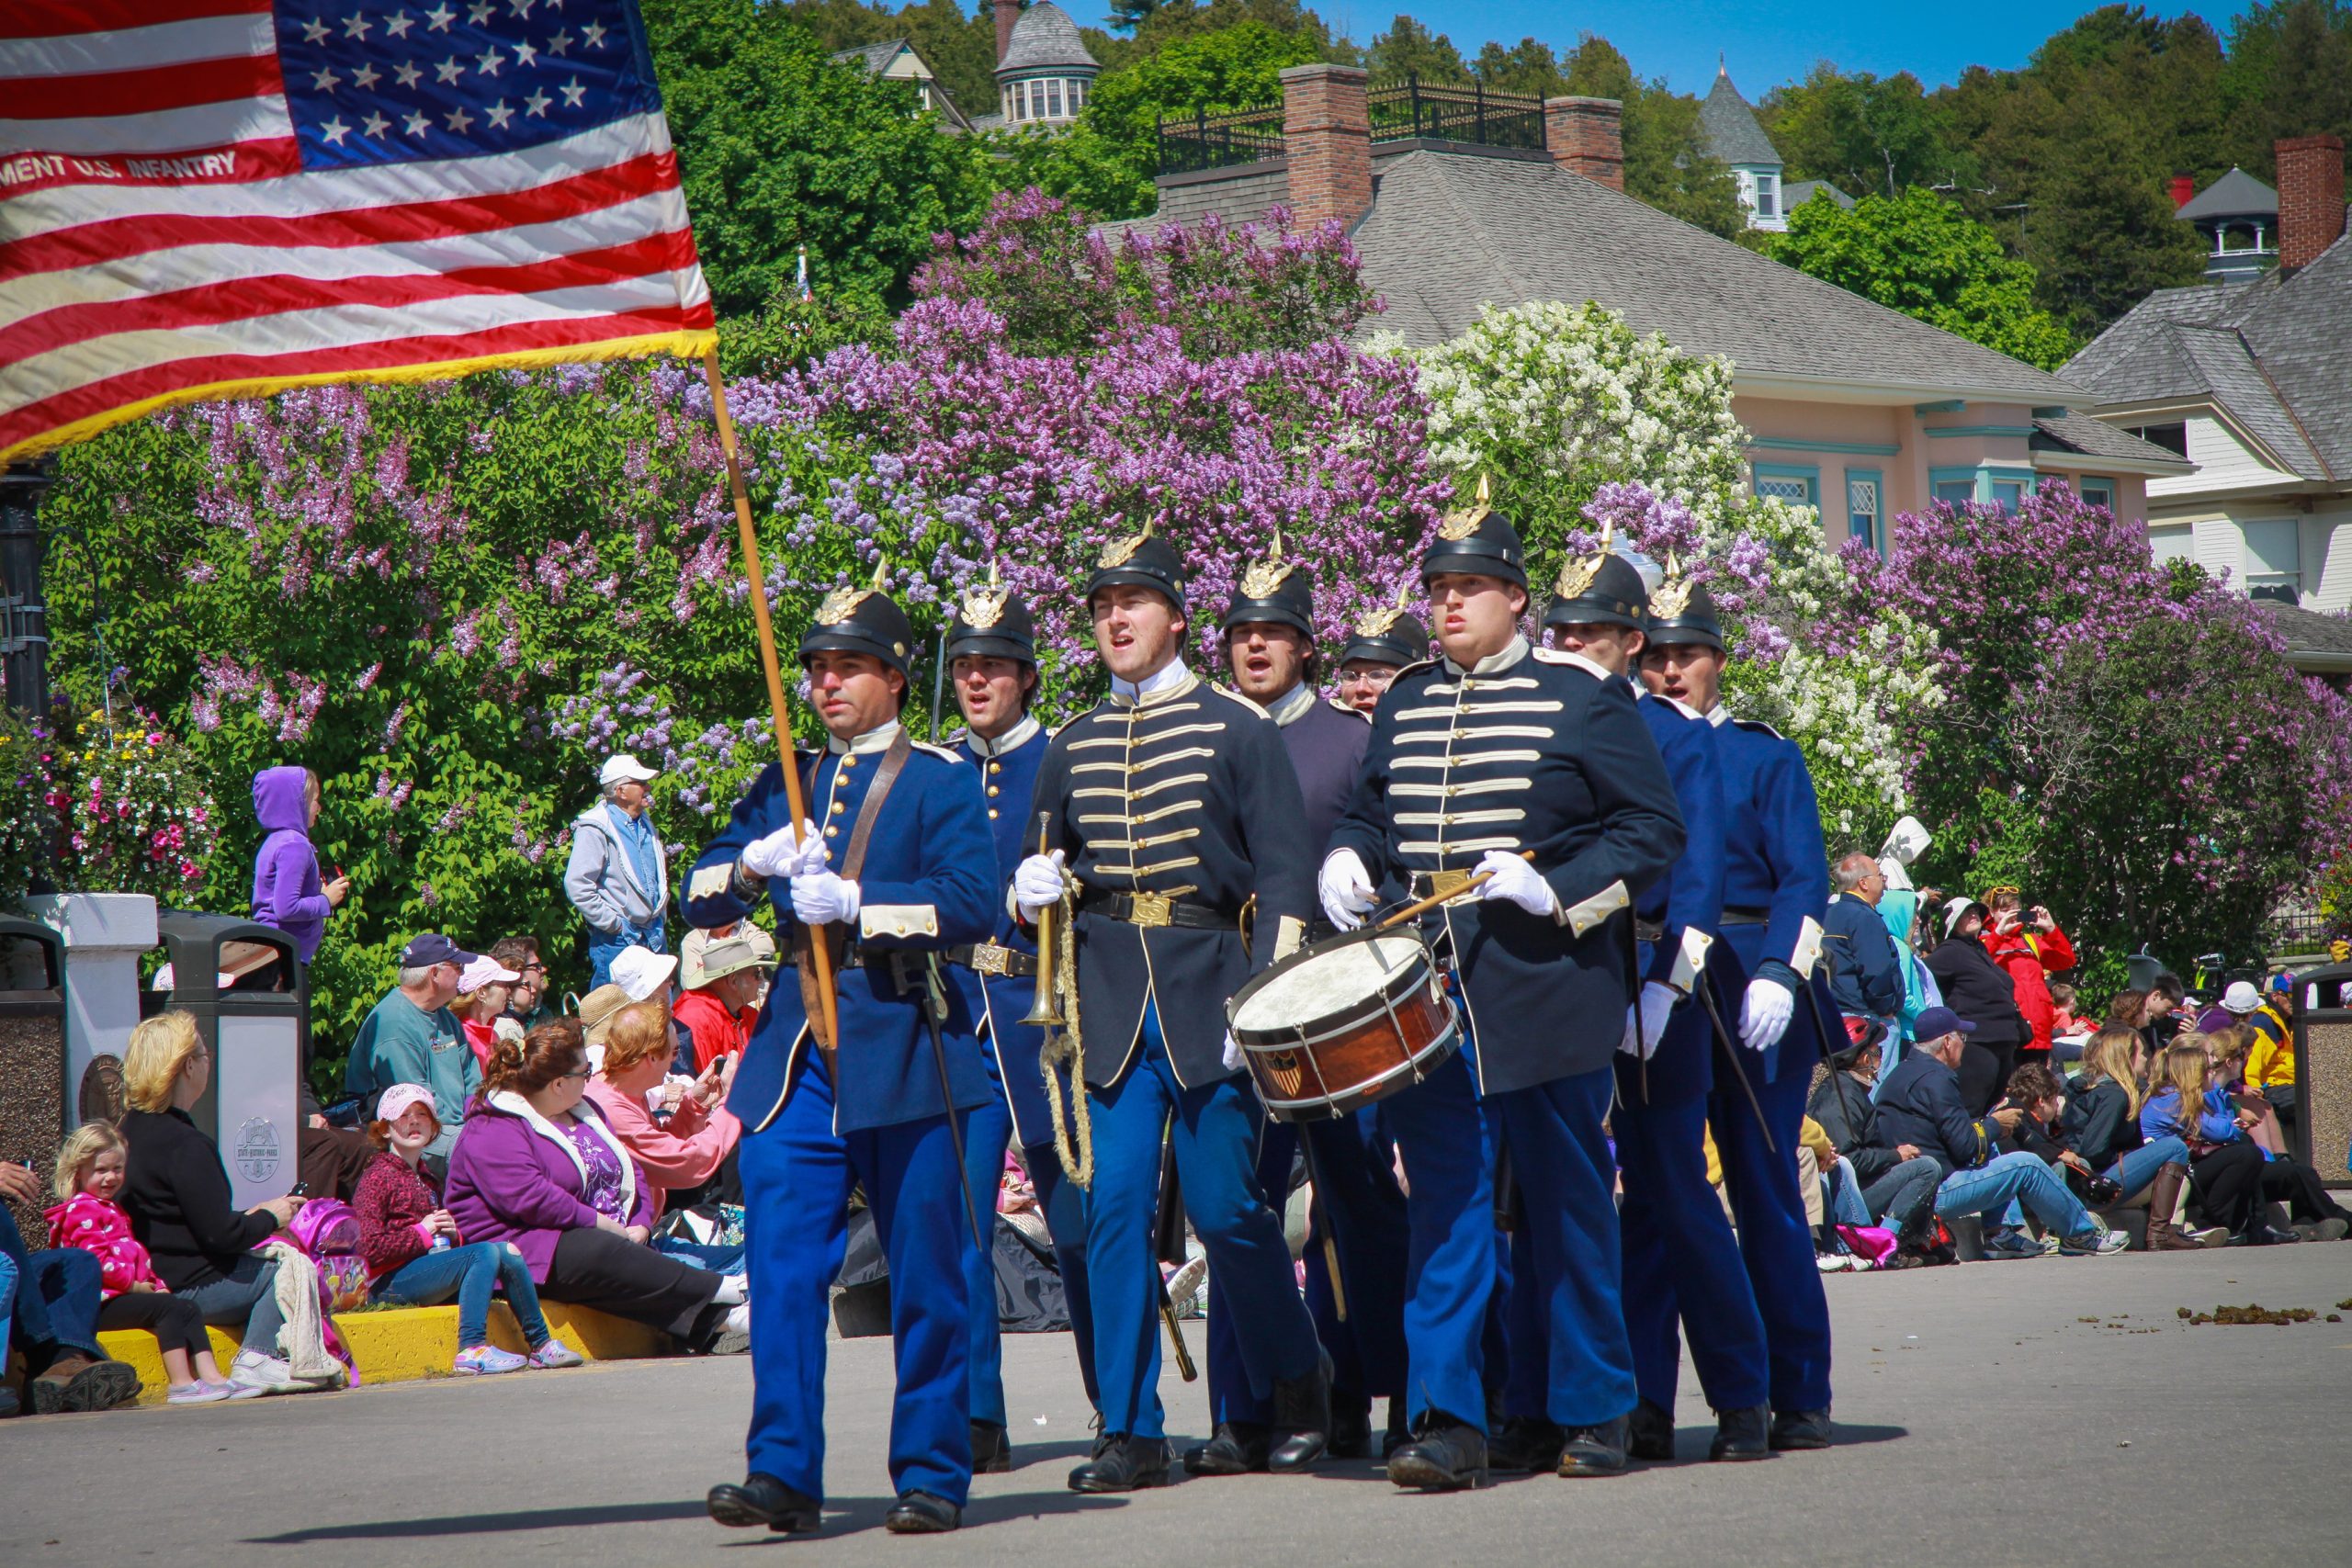 A group of interpretive soldiers walk down the street playing drums and carrying an American flag during a Mackinac Island parade